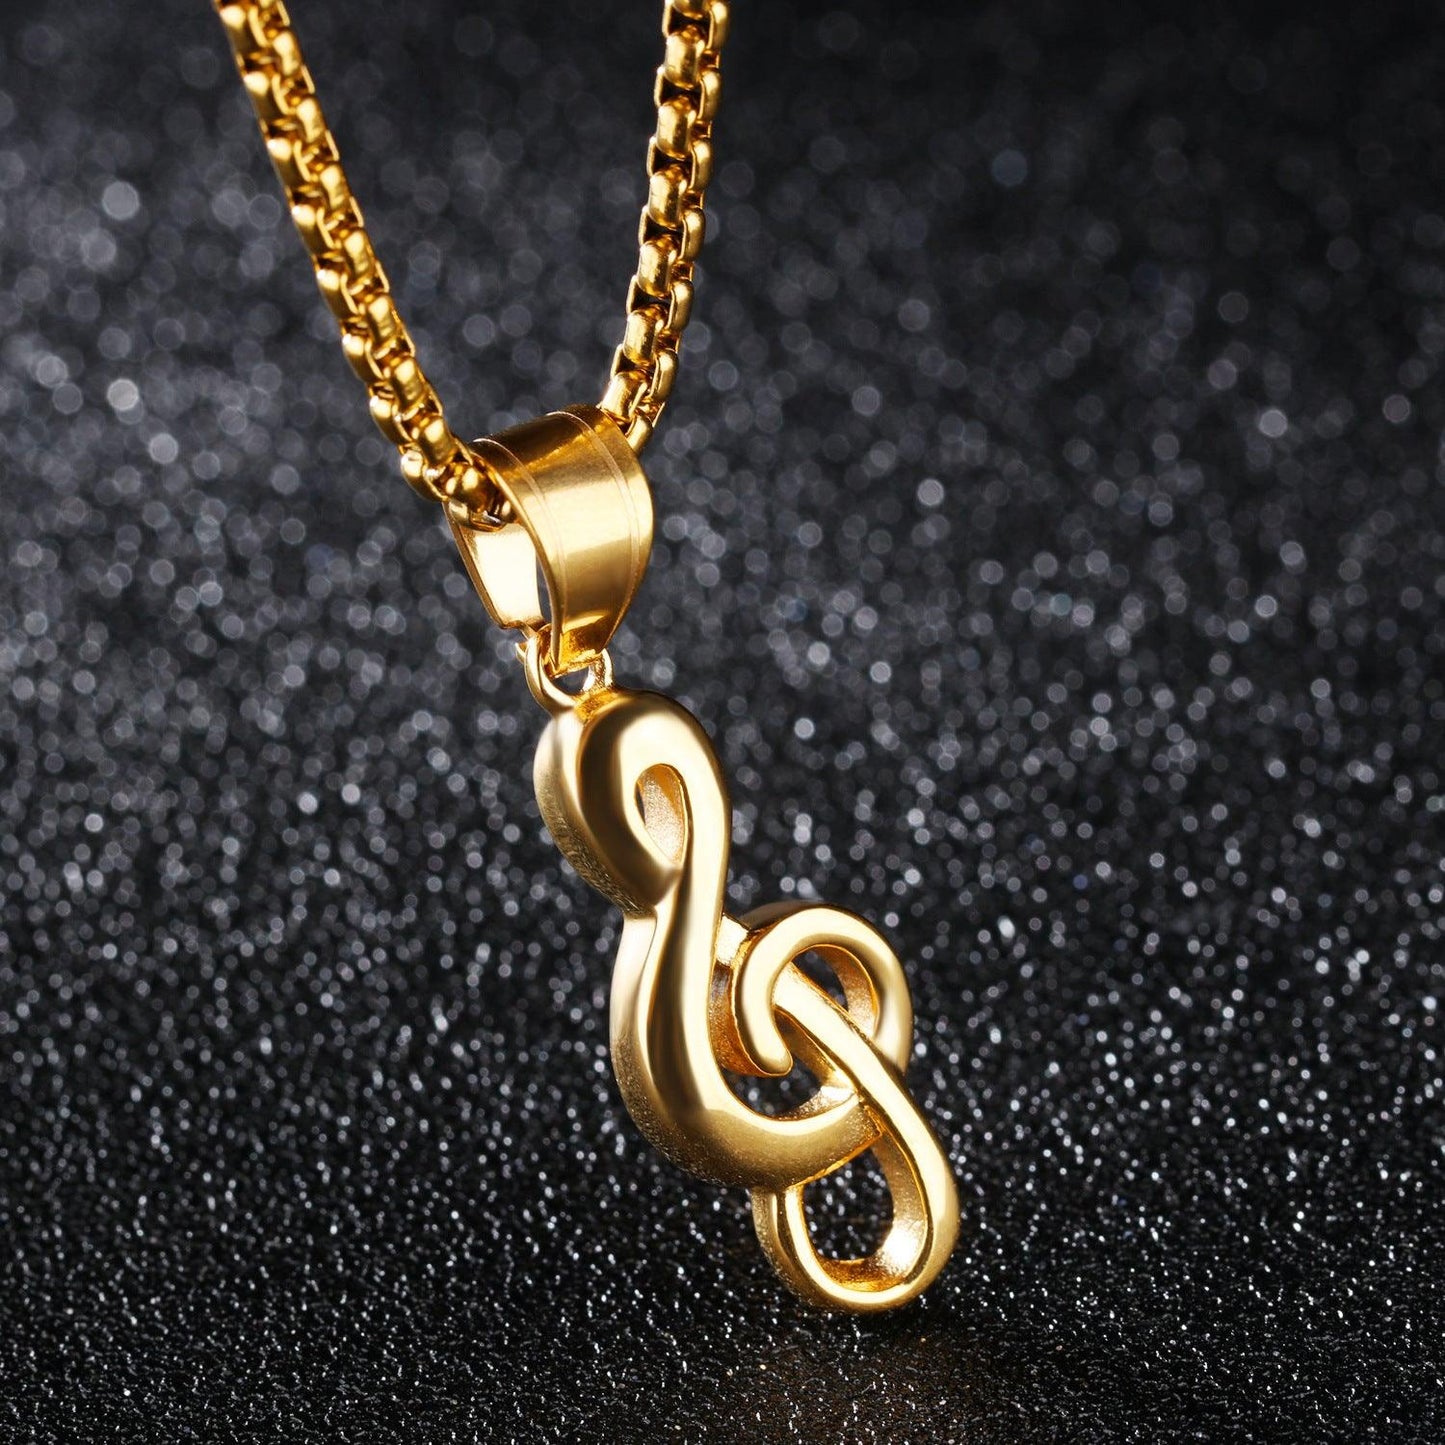 Music symbol necklace Automizely Dropshipping